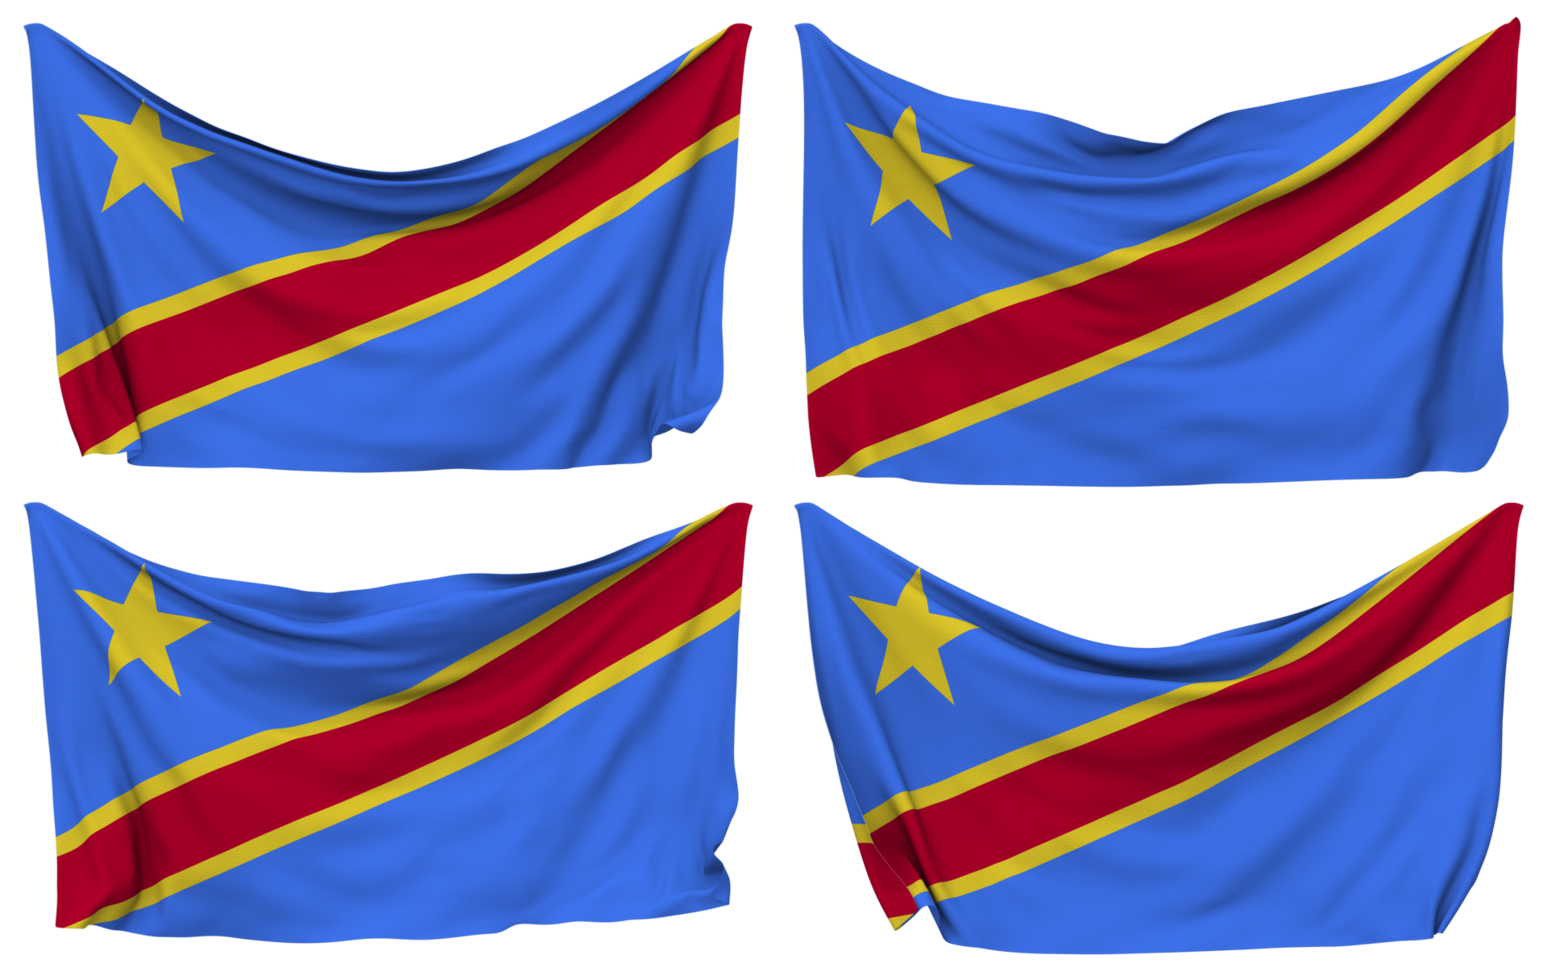 DR Congo Pinned Flag from Corners, Isolated with Different Waving Variations, 3D Rendering png